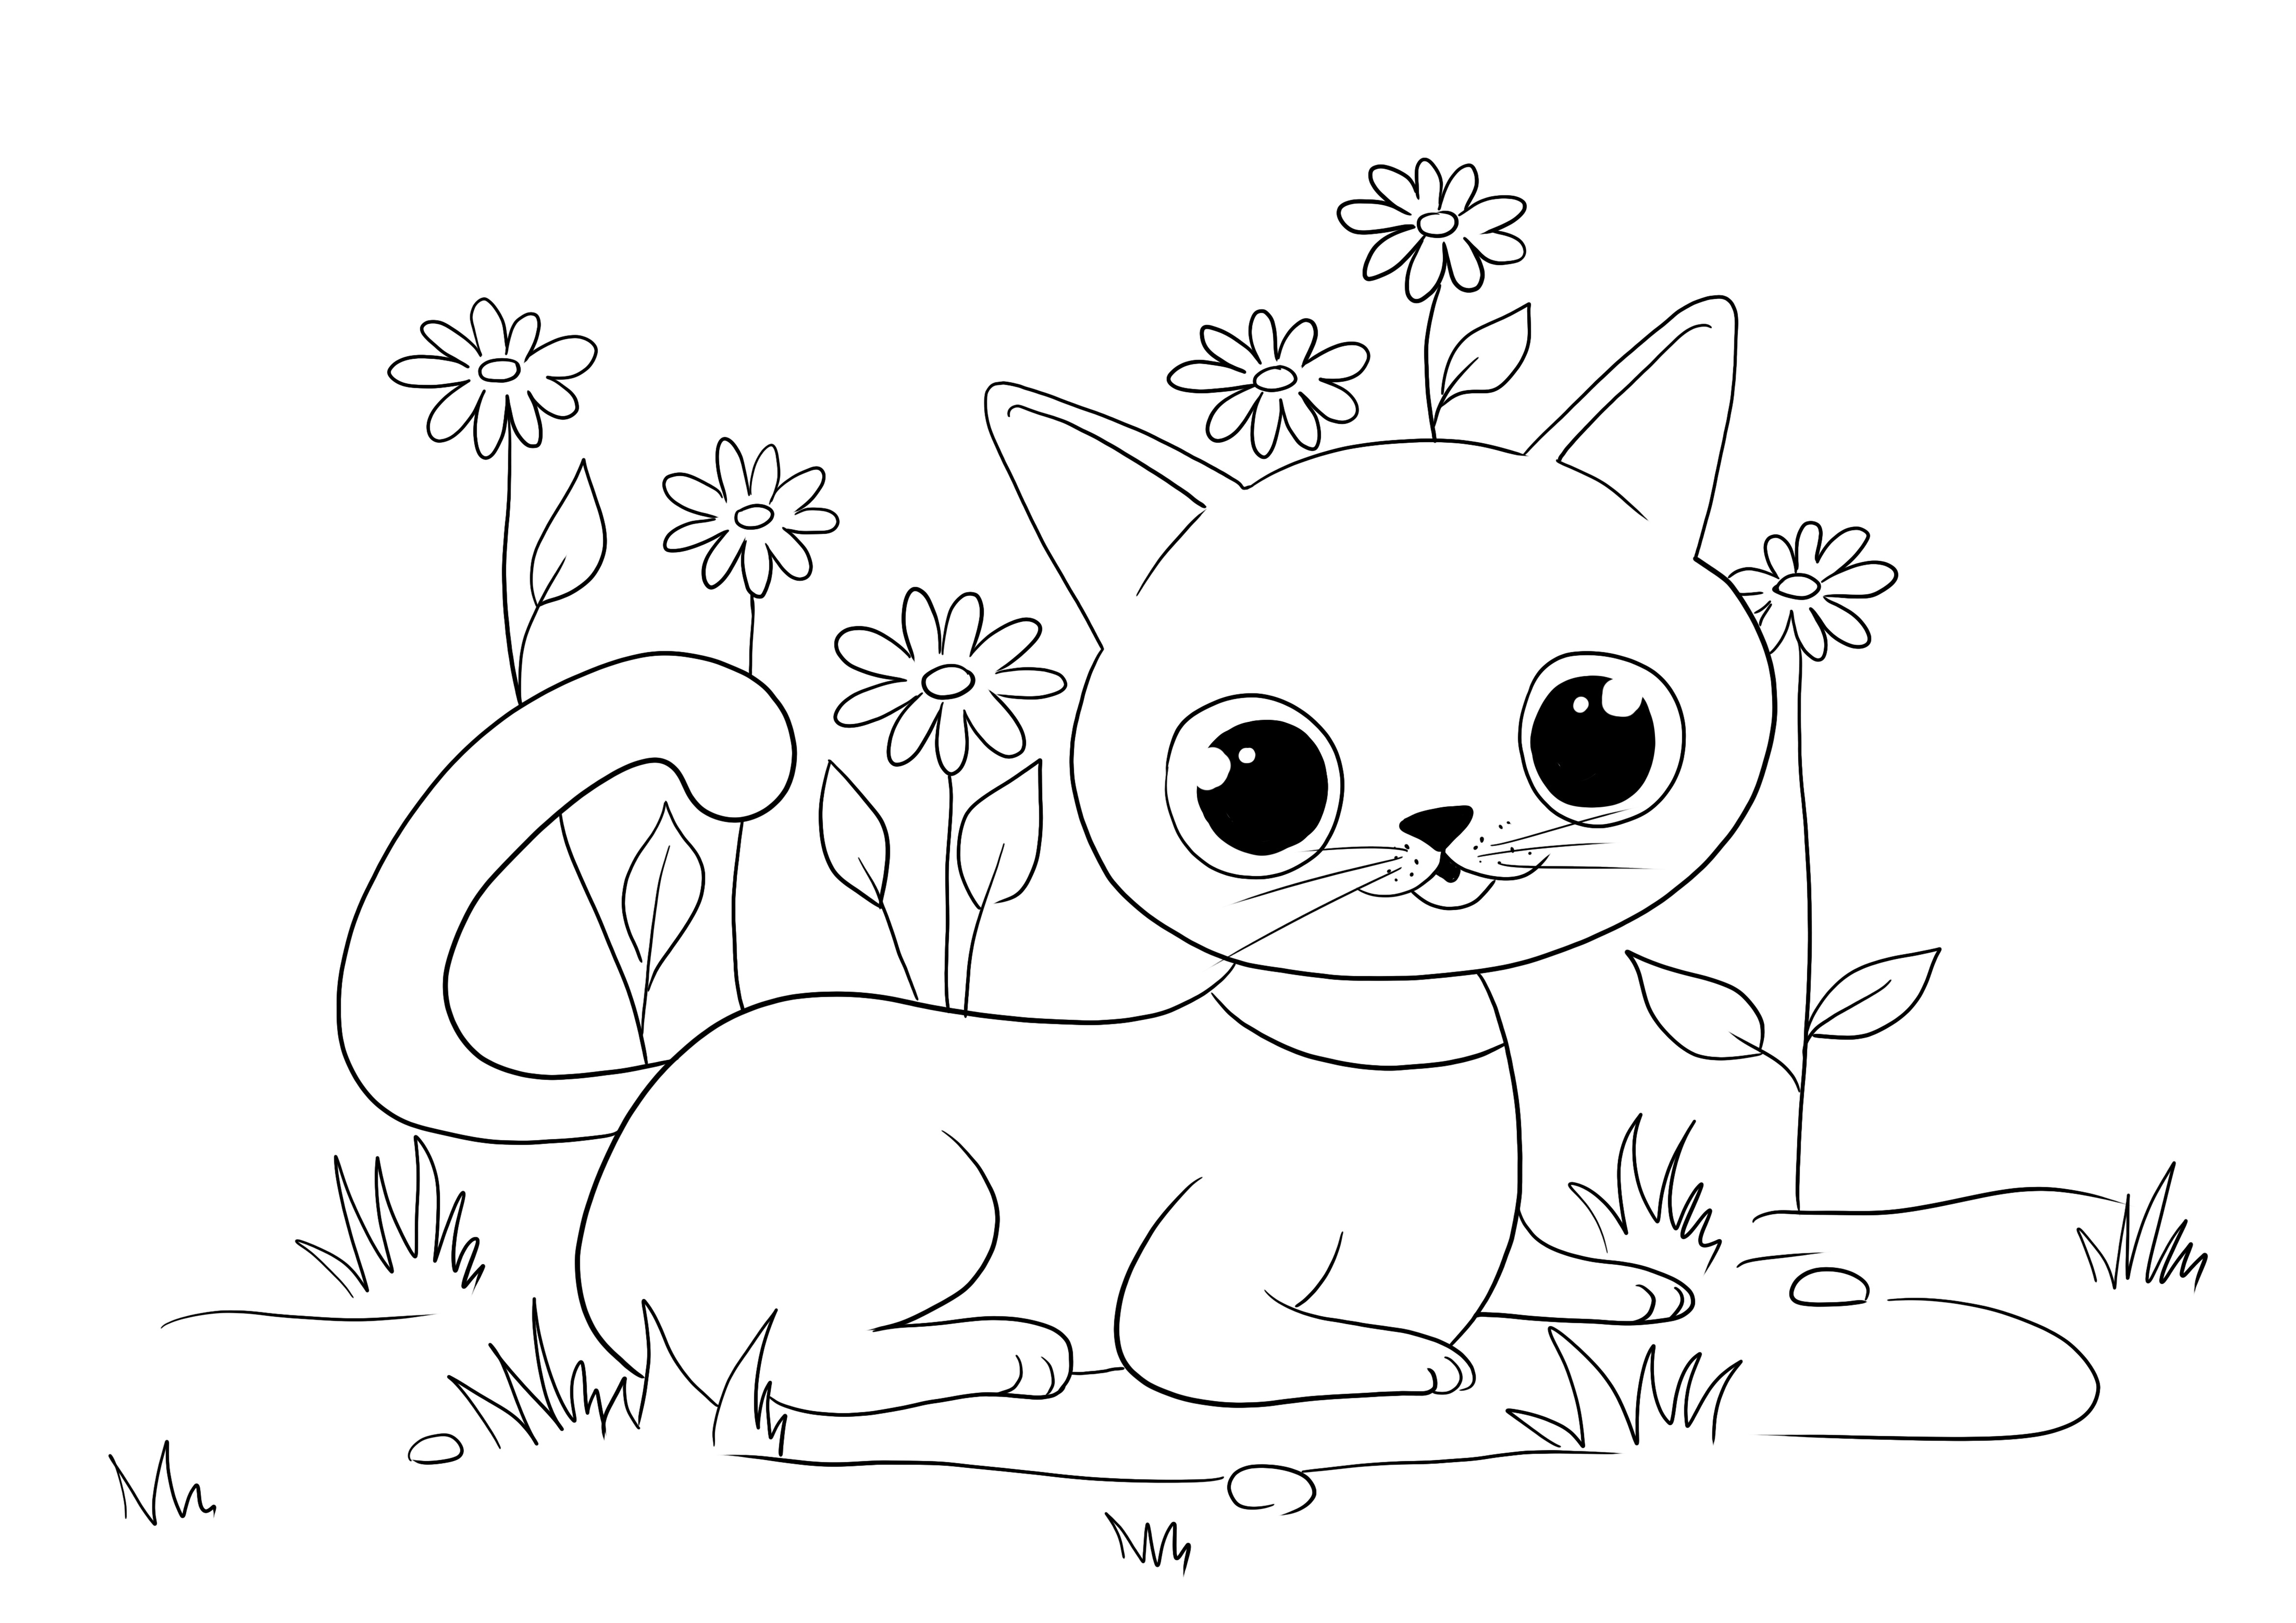 Black-eyed cat to download for free and color for kids